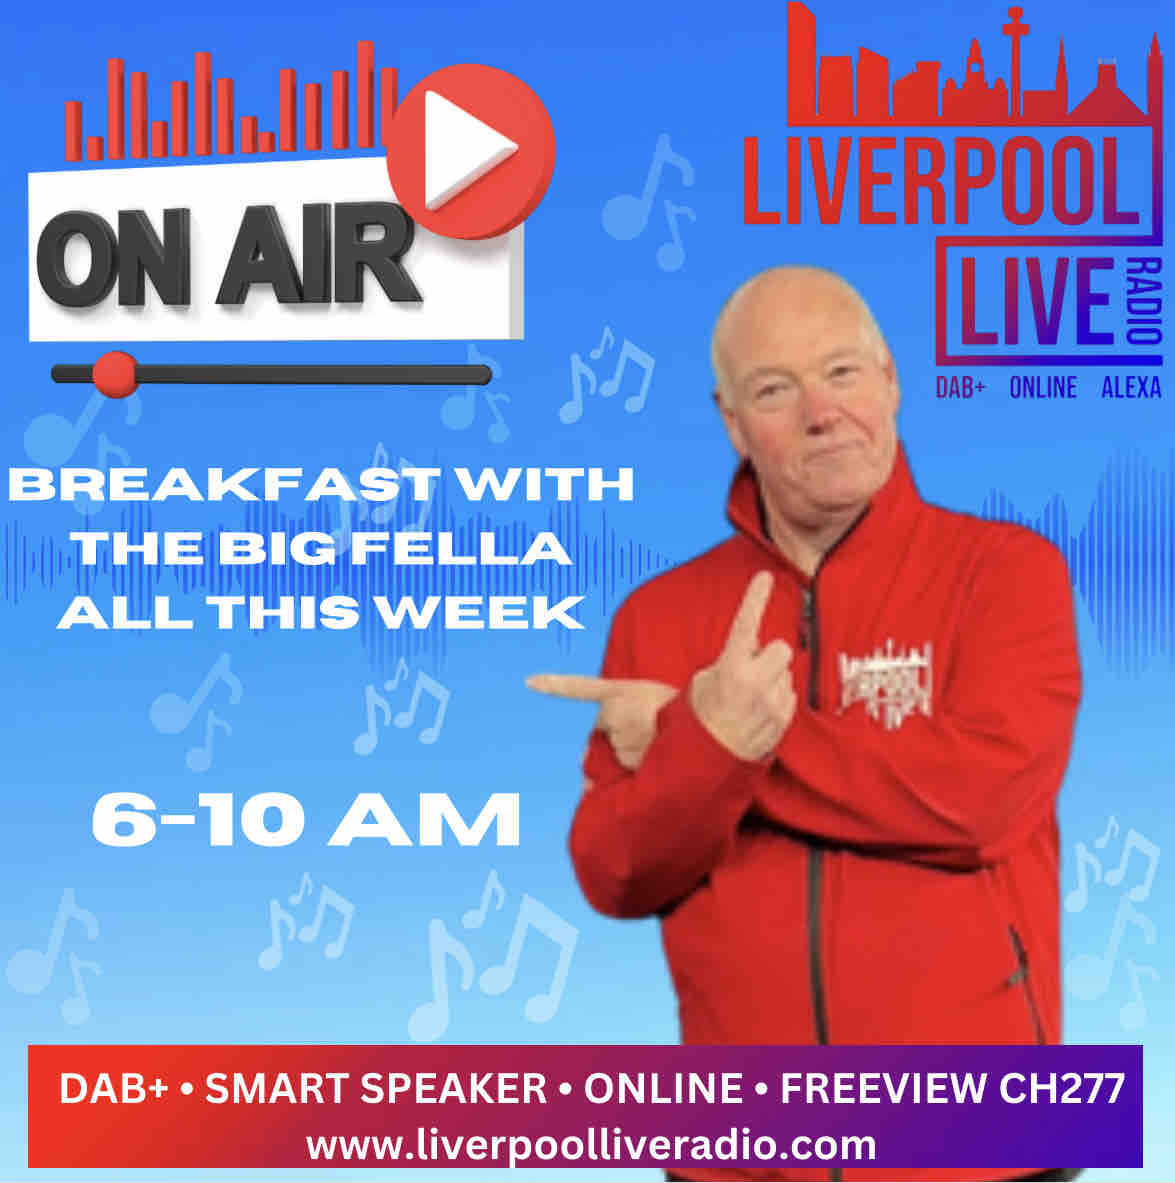 🎶📻 Wake up it’s a beautiful morning 📻🎶 Tune into breakfast with the big fella 6-10am on liverpool live radio !